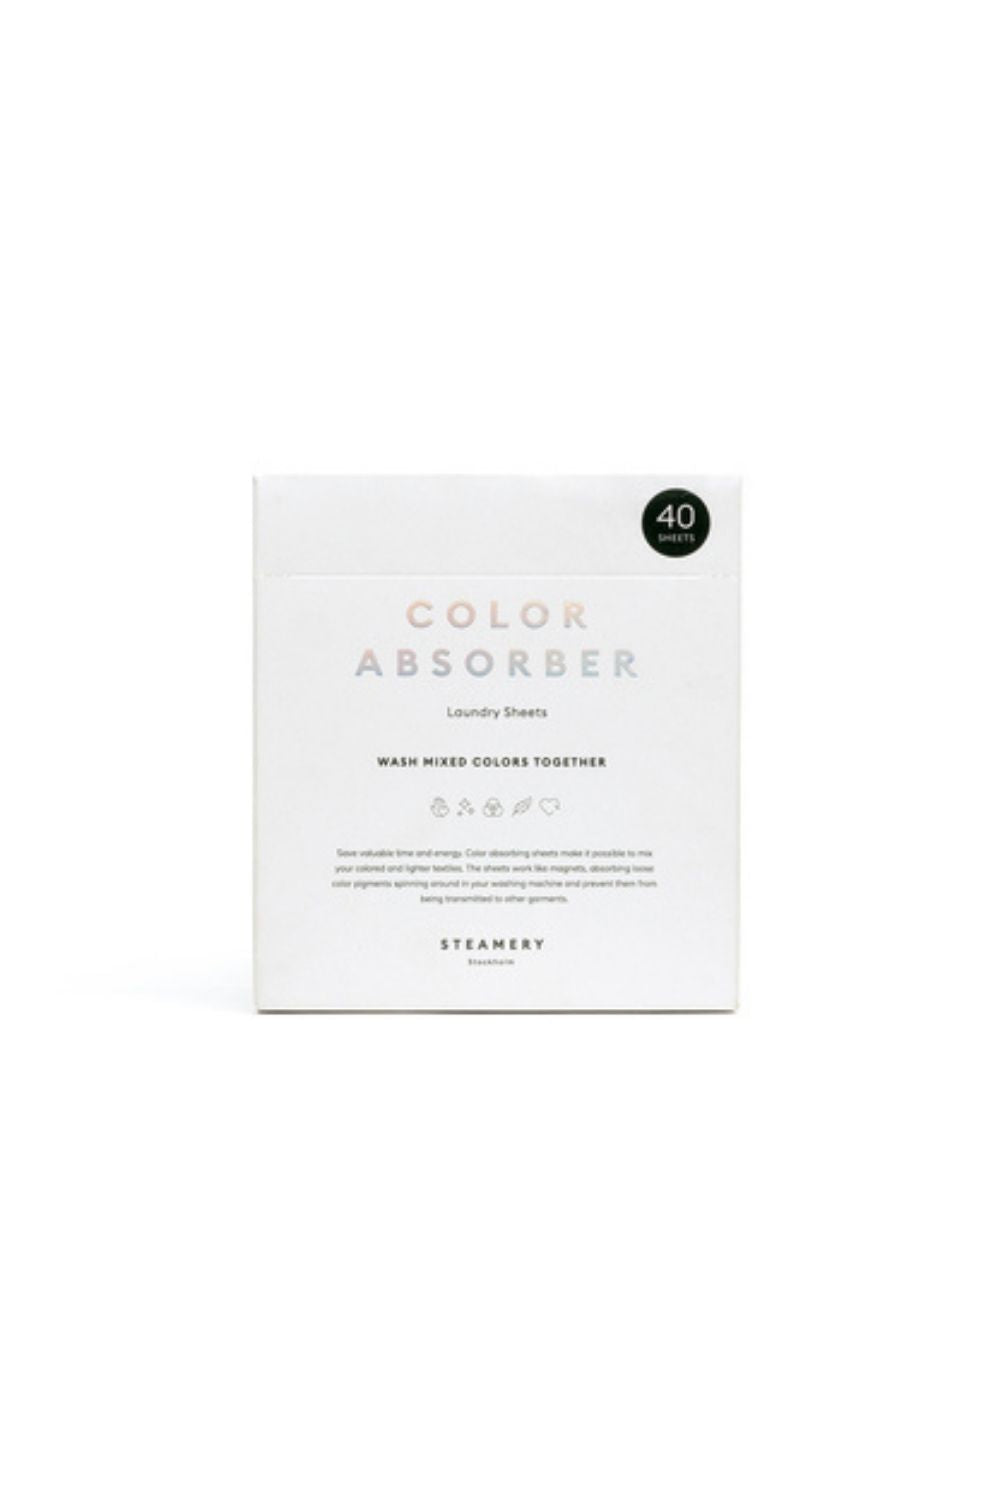 O'TAY Color Absorbing Wipes Plejeprodukter White